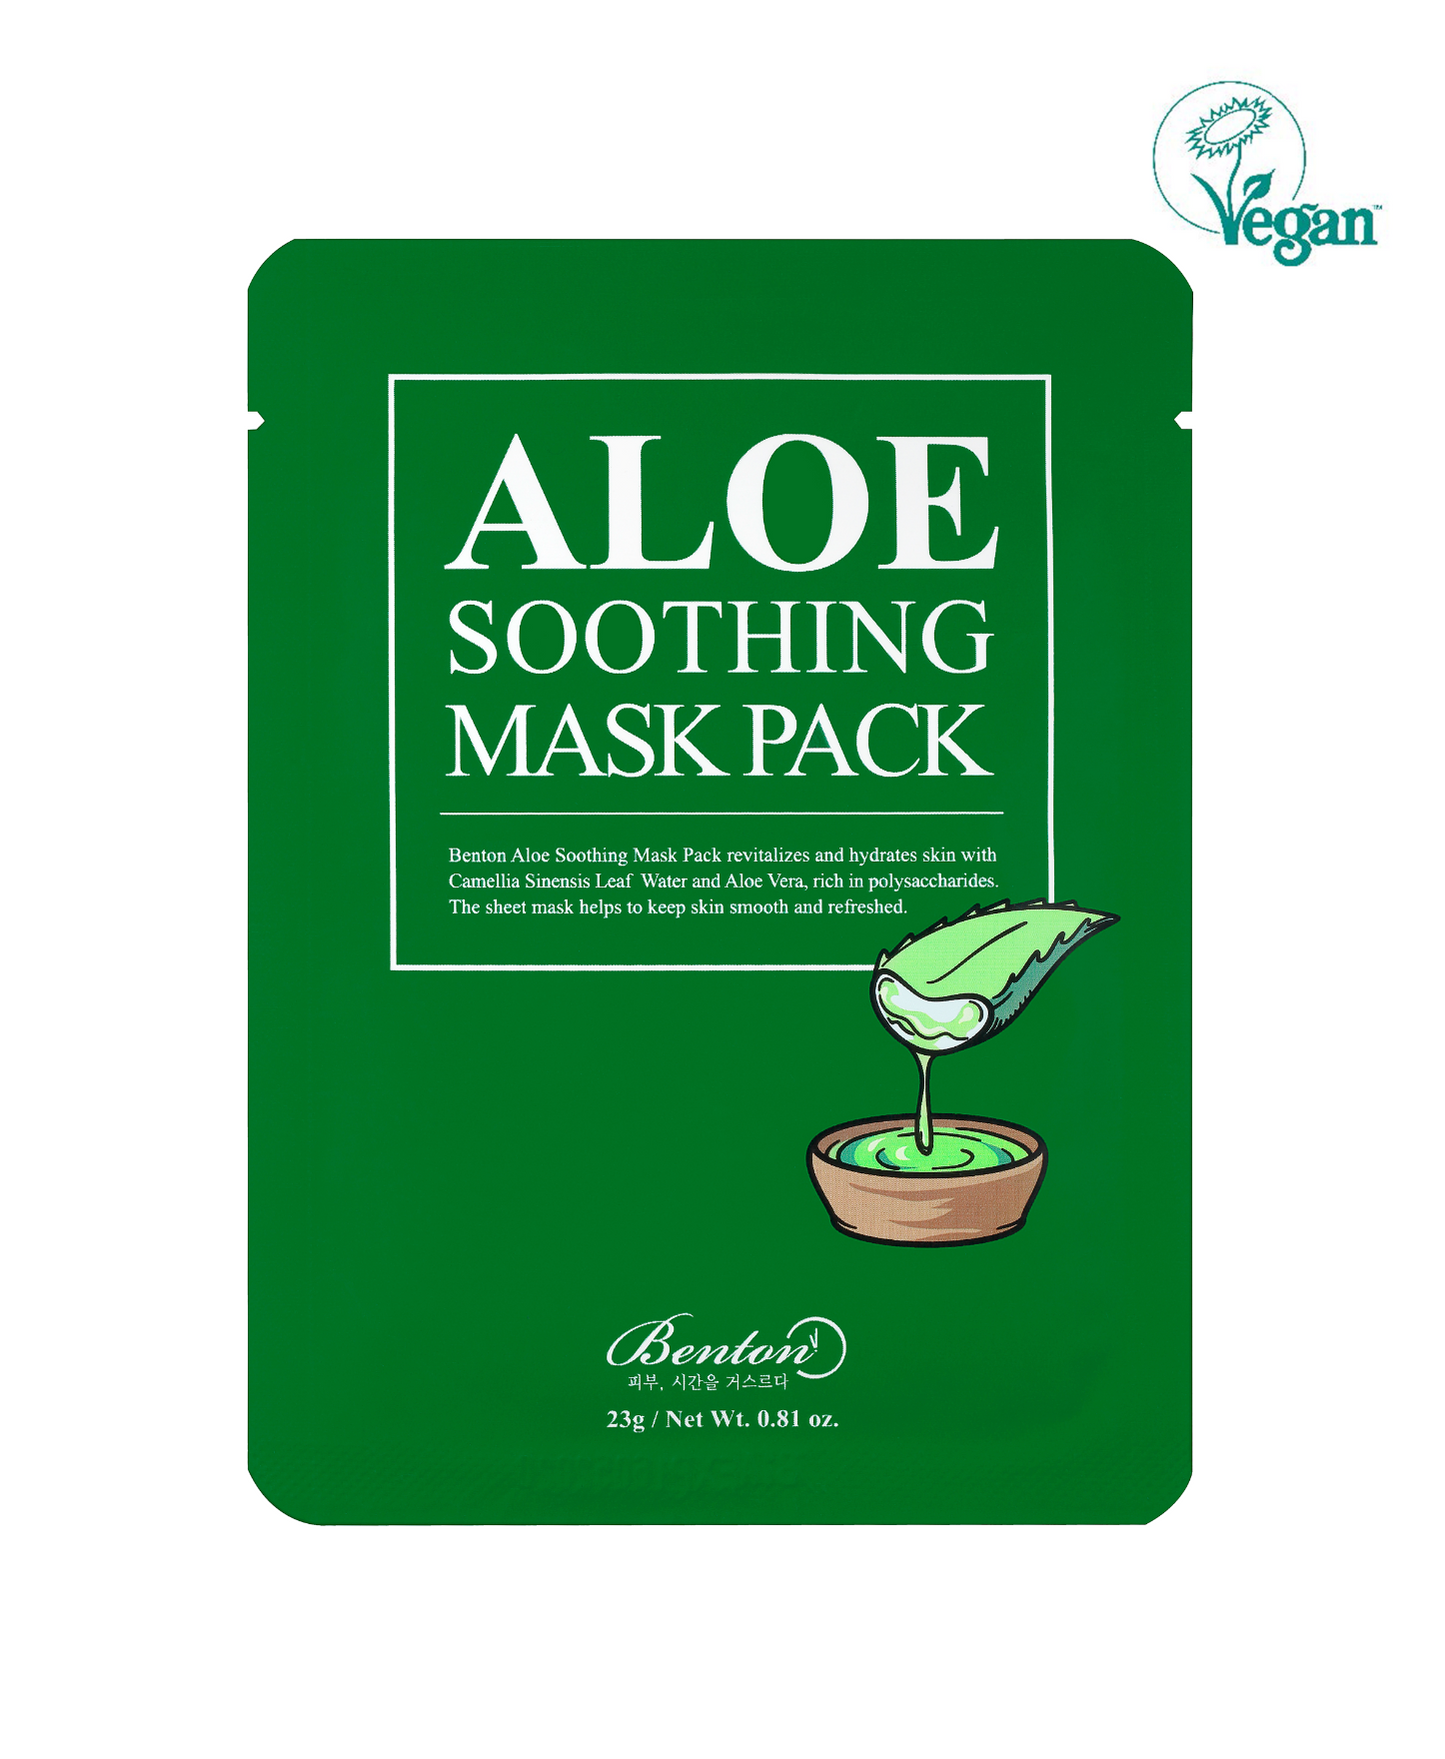 Aloe Soothing Mask Pack